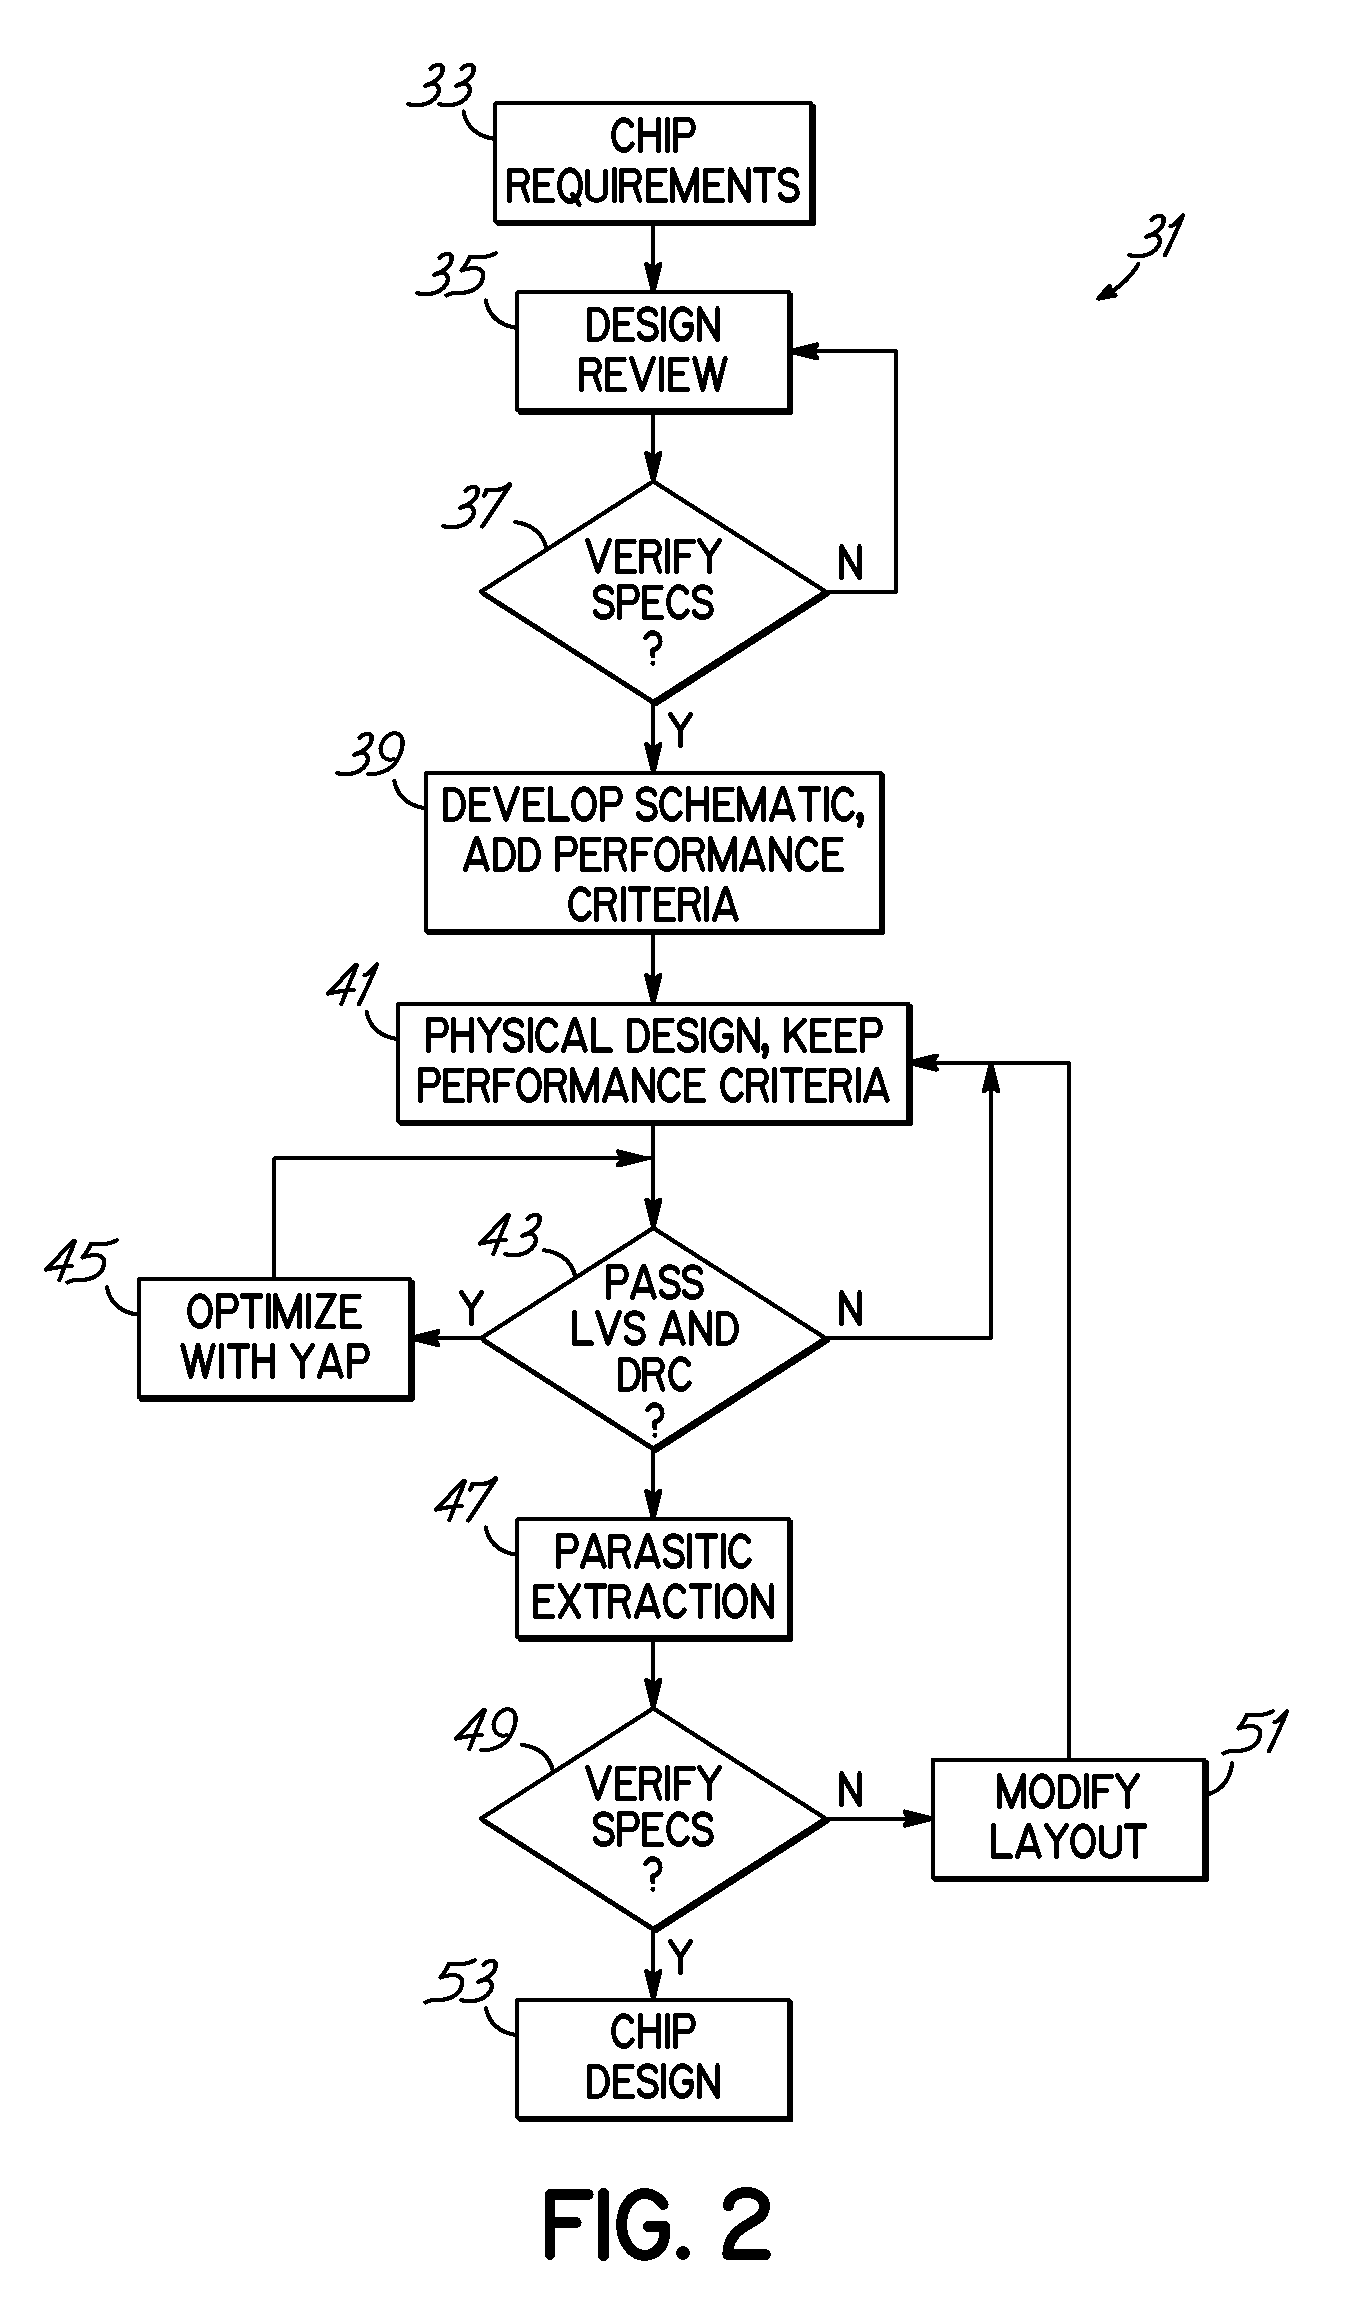 Variable performance ranking and modification in design for manufacturability of circuits